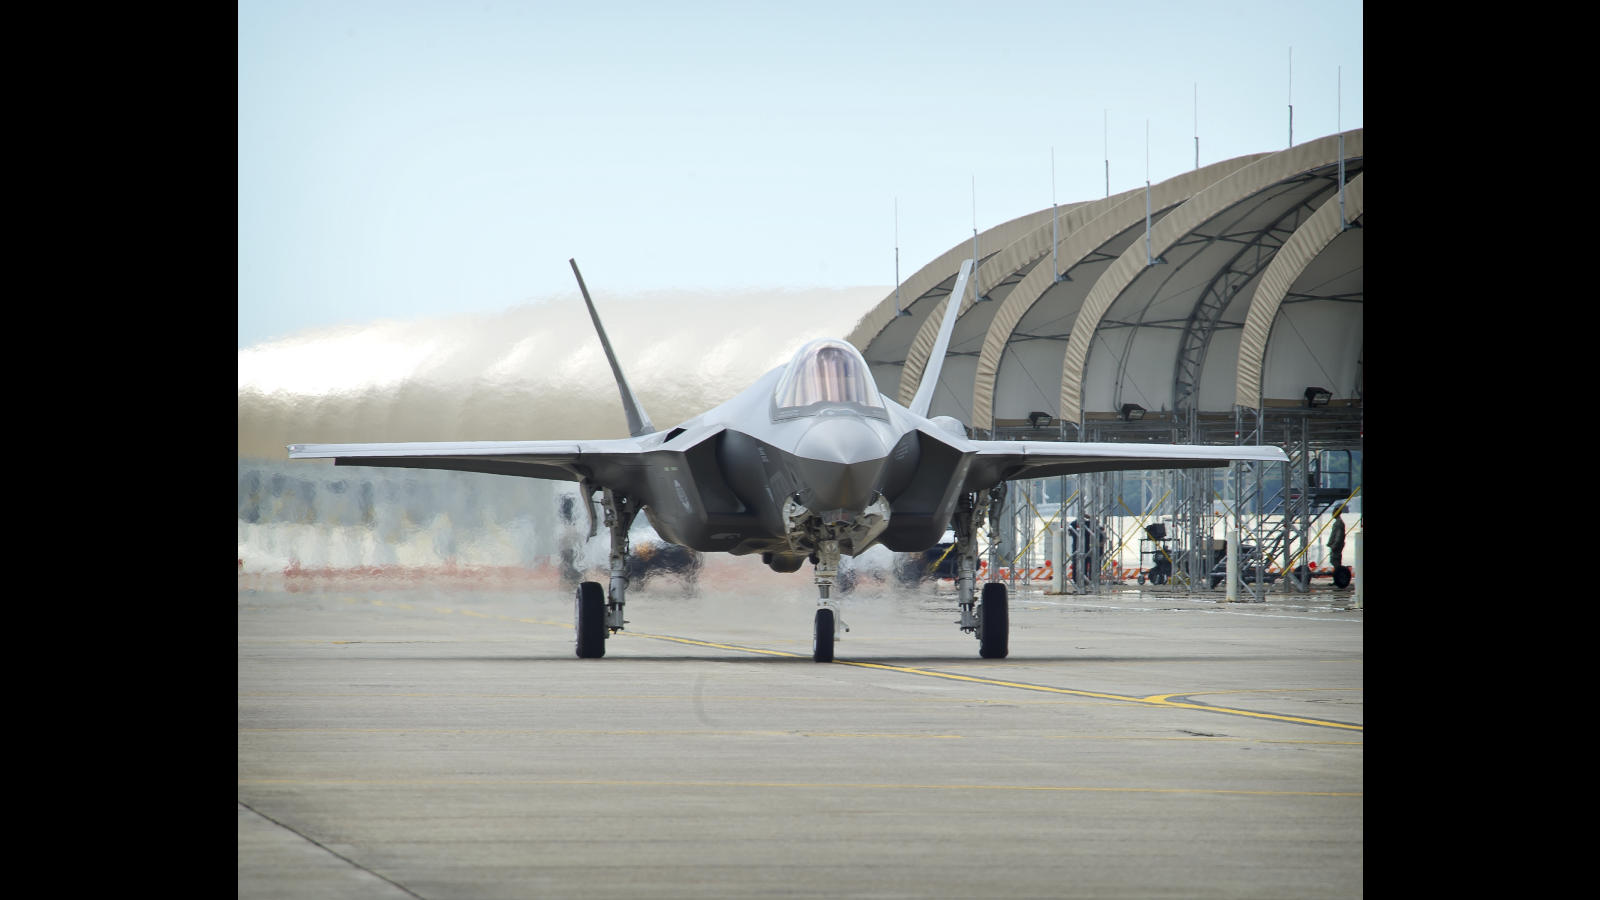 Lt. Col. Eric Smith flight in F-35 at Eglin Air Force Base